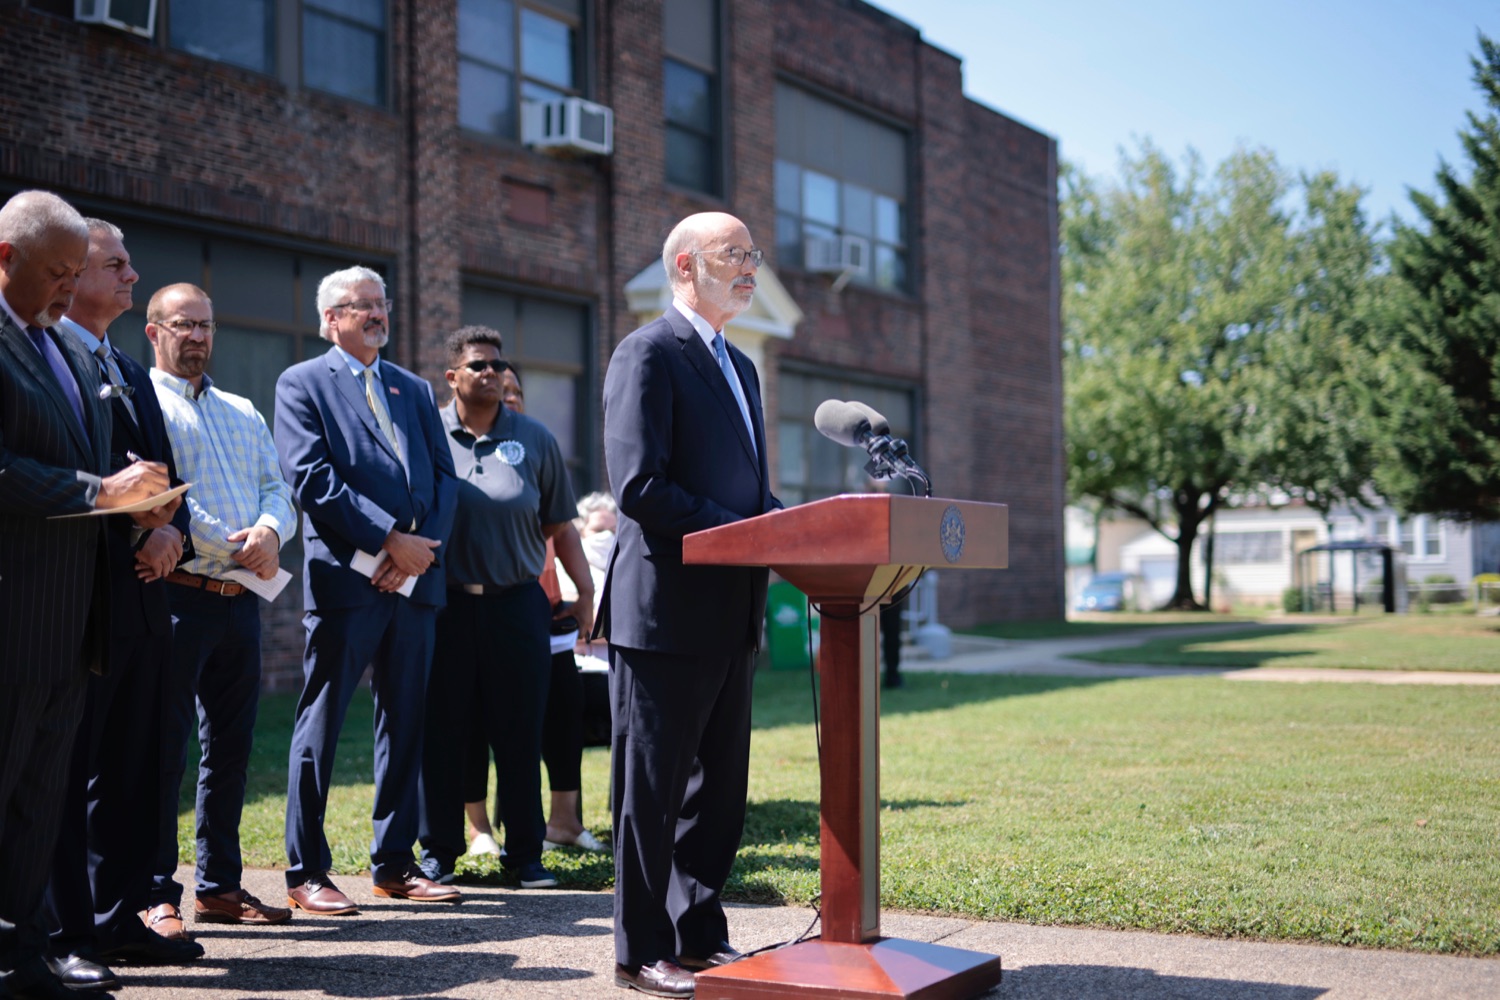 Gov. Wolf, Legislators Reintroduce PA Opportunity Program, Continue Fight for $2,000 Direct Payments to Pennsylvanians.<br><a href="https://filesource.amperwave.net/commonwealthofpa/photo/22070_gov_opportunityFund_03.jpg" target="_blank">⇣ Download Photo</a>